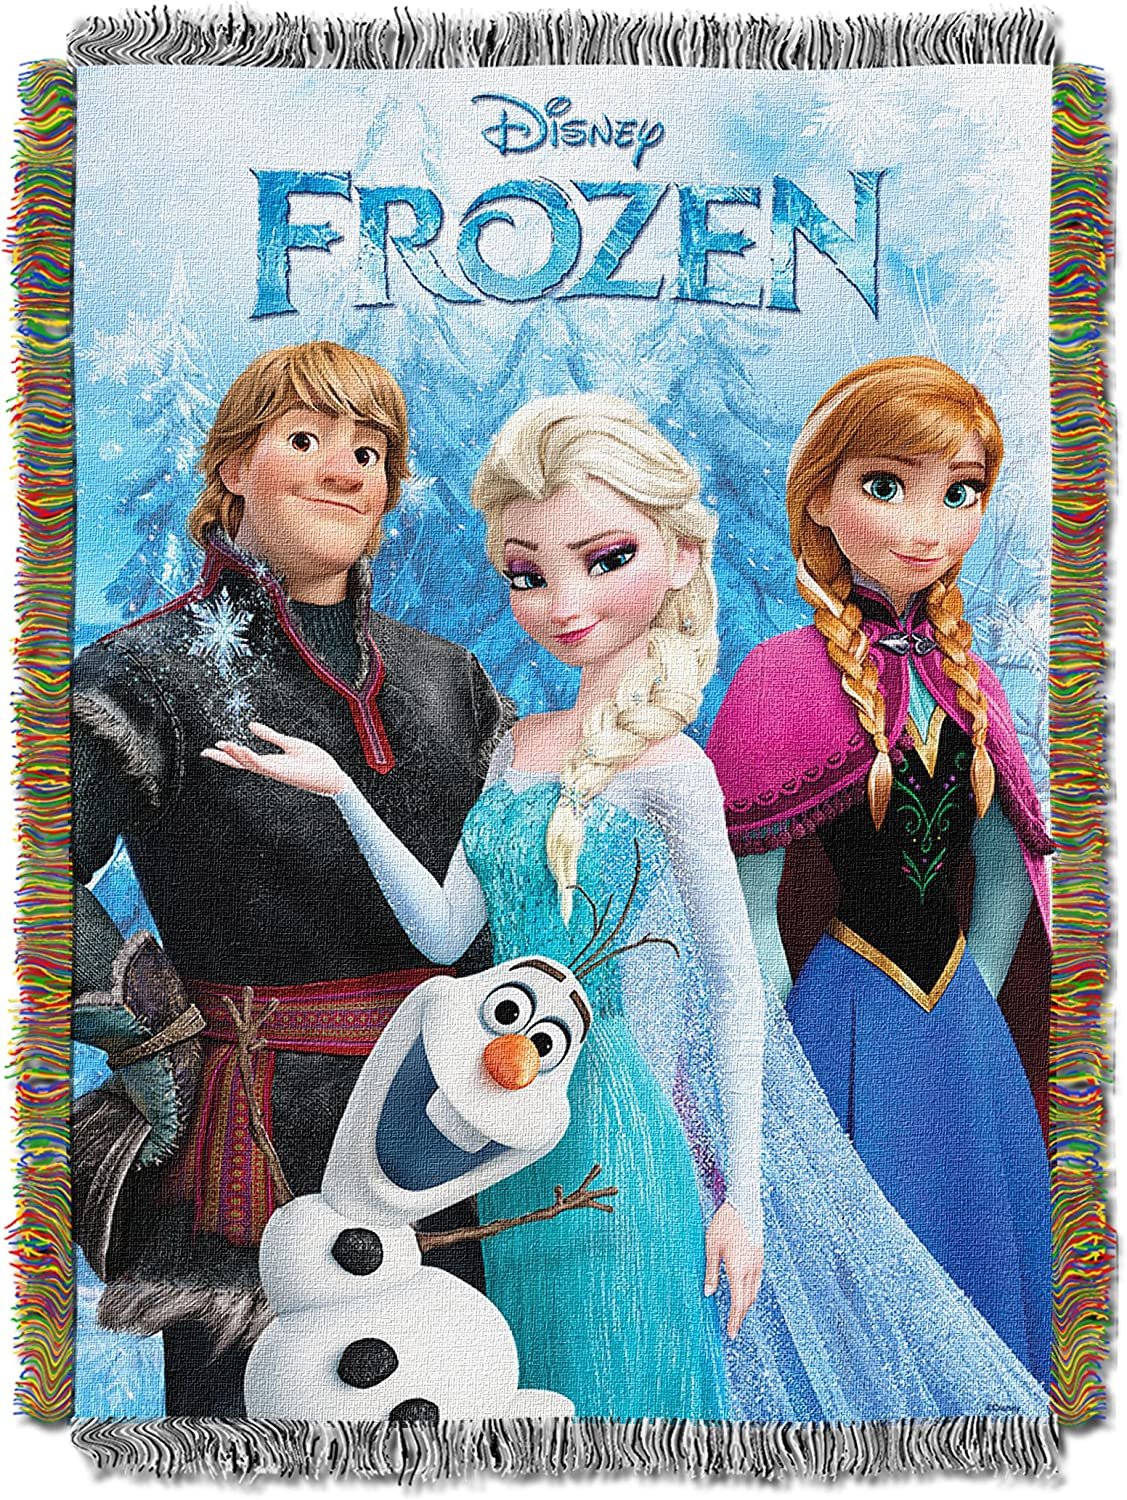 Disney Frozen Tapestry Throw Blanket, 48x60, Multicolor, Polyester, Machine Wash, 1 Each - image 1 of 4